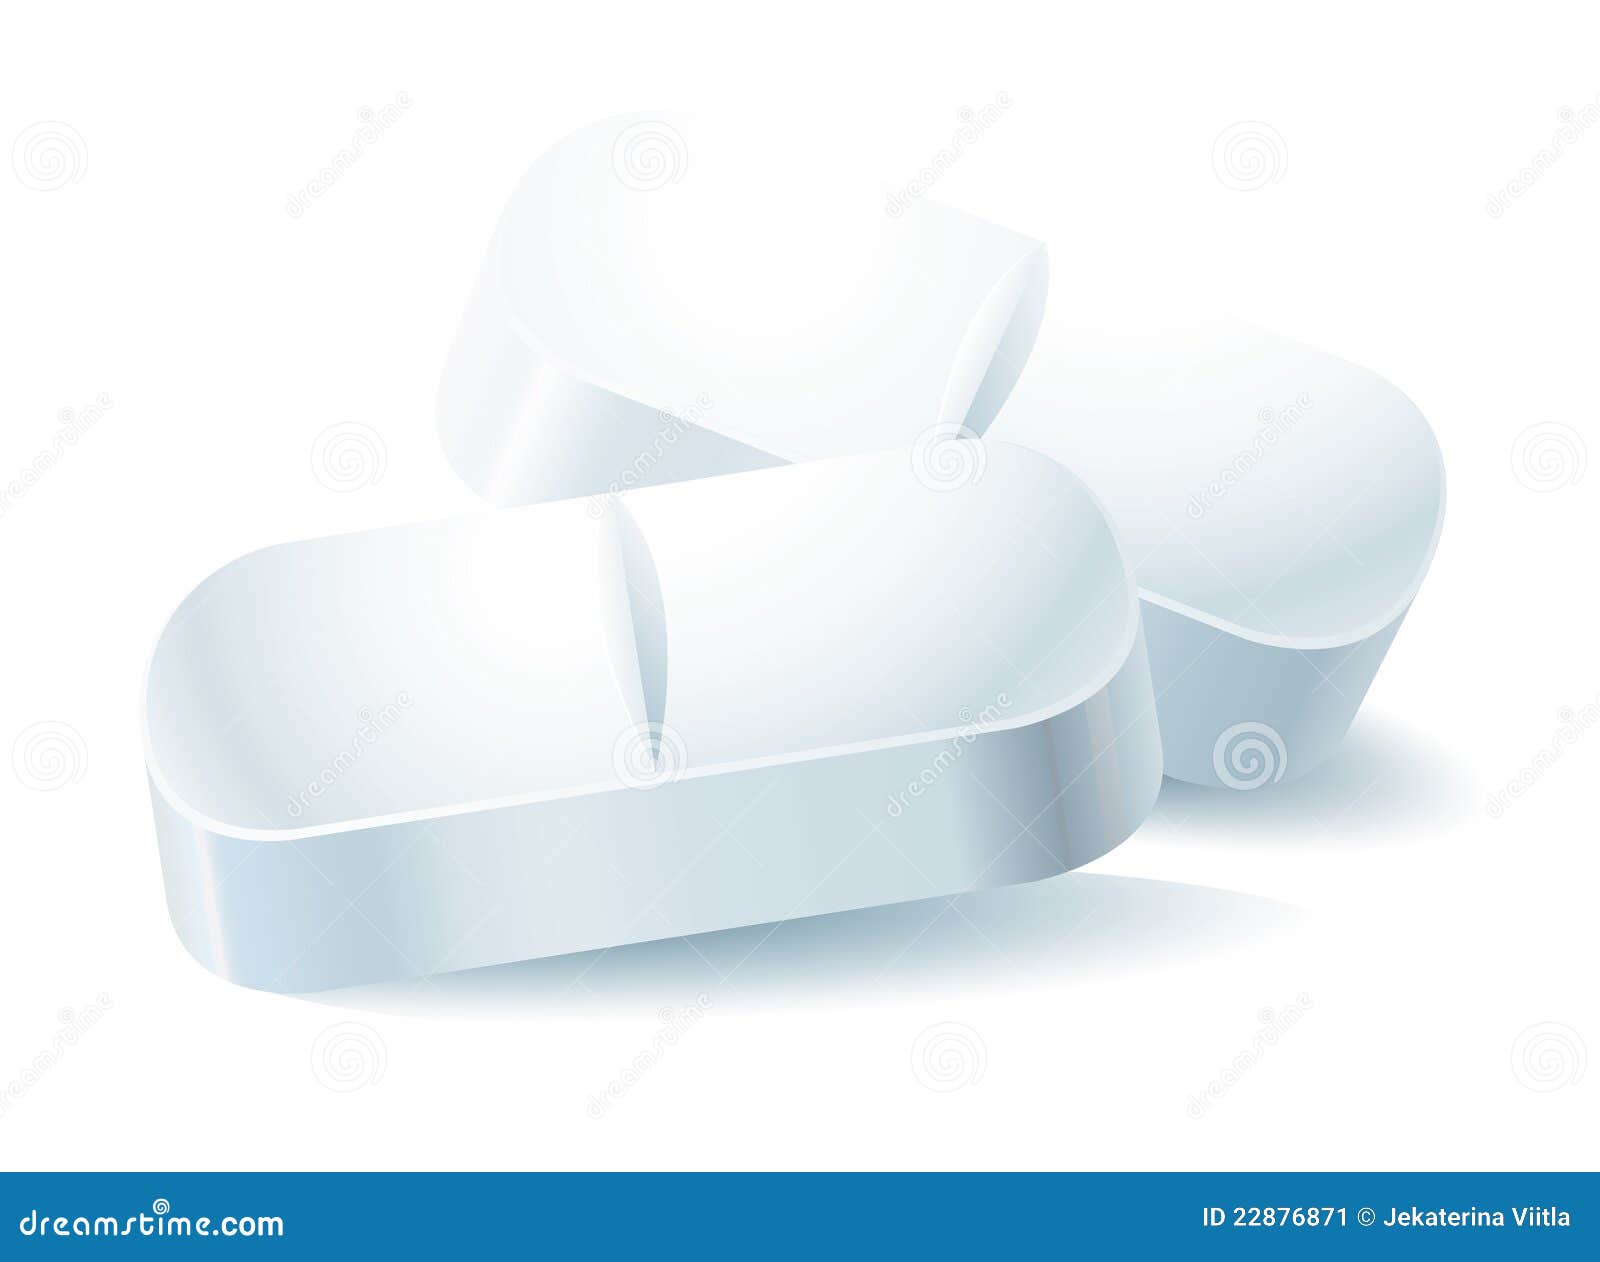 Medical pills. Vector illustration of two white pills. AI8, no gradient mesh used, grouped by objects